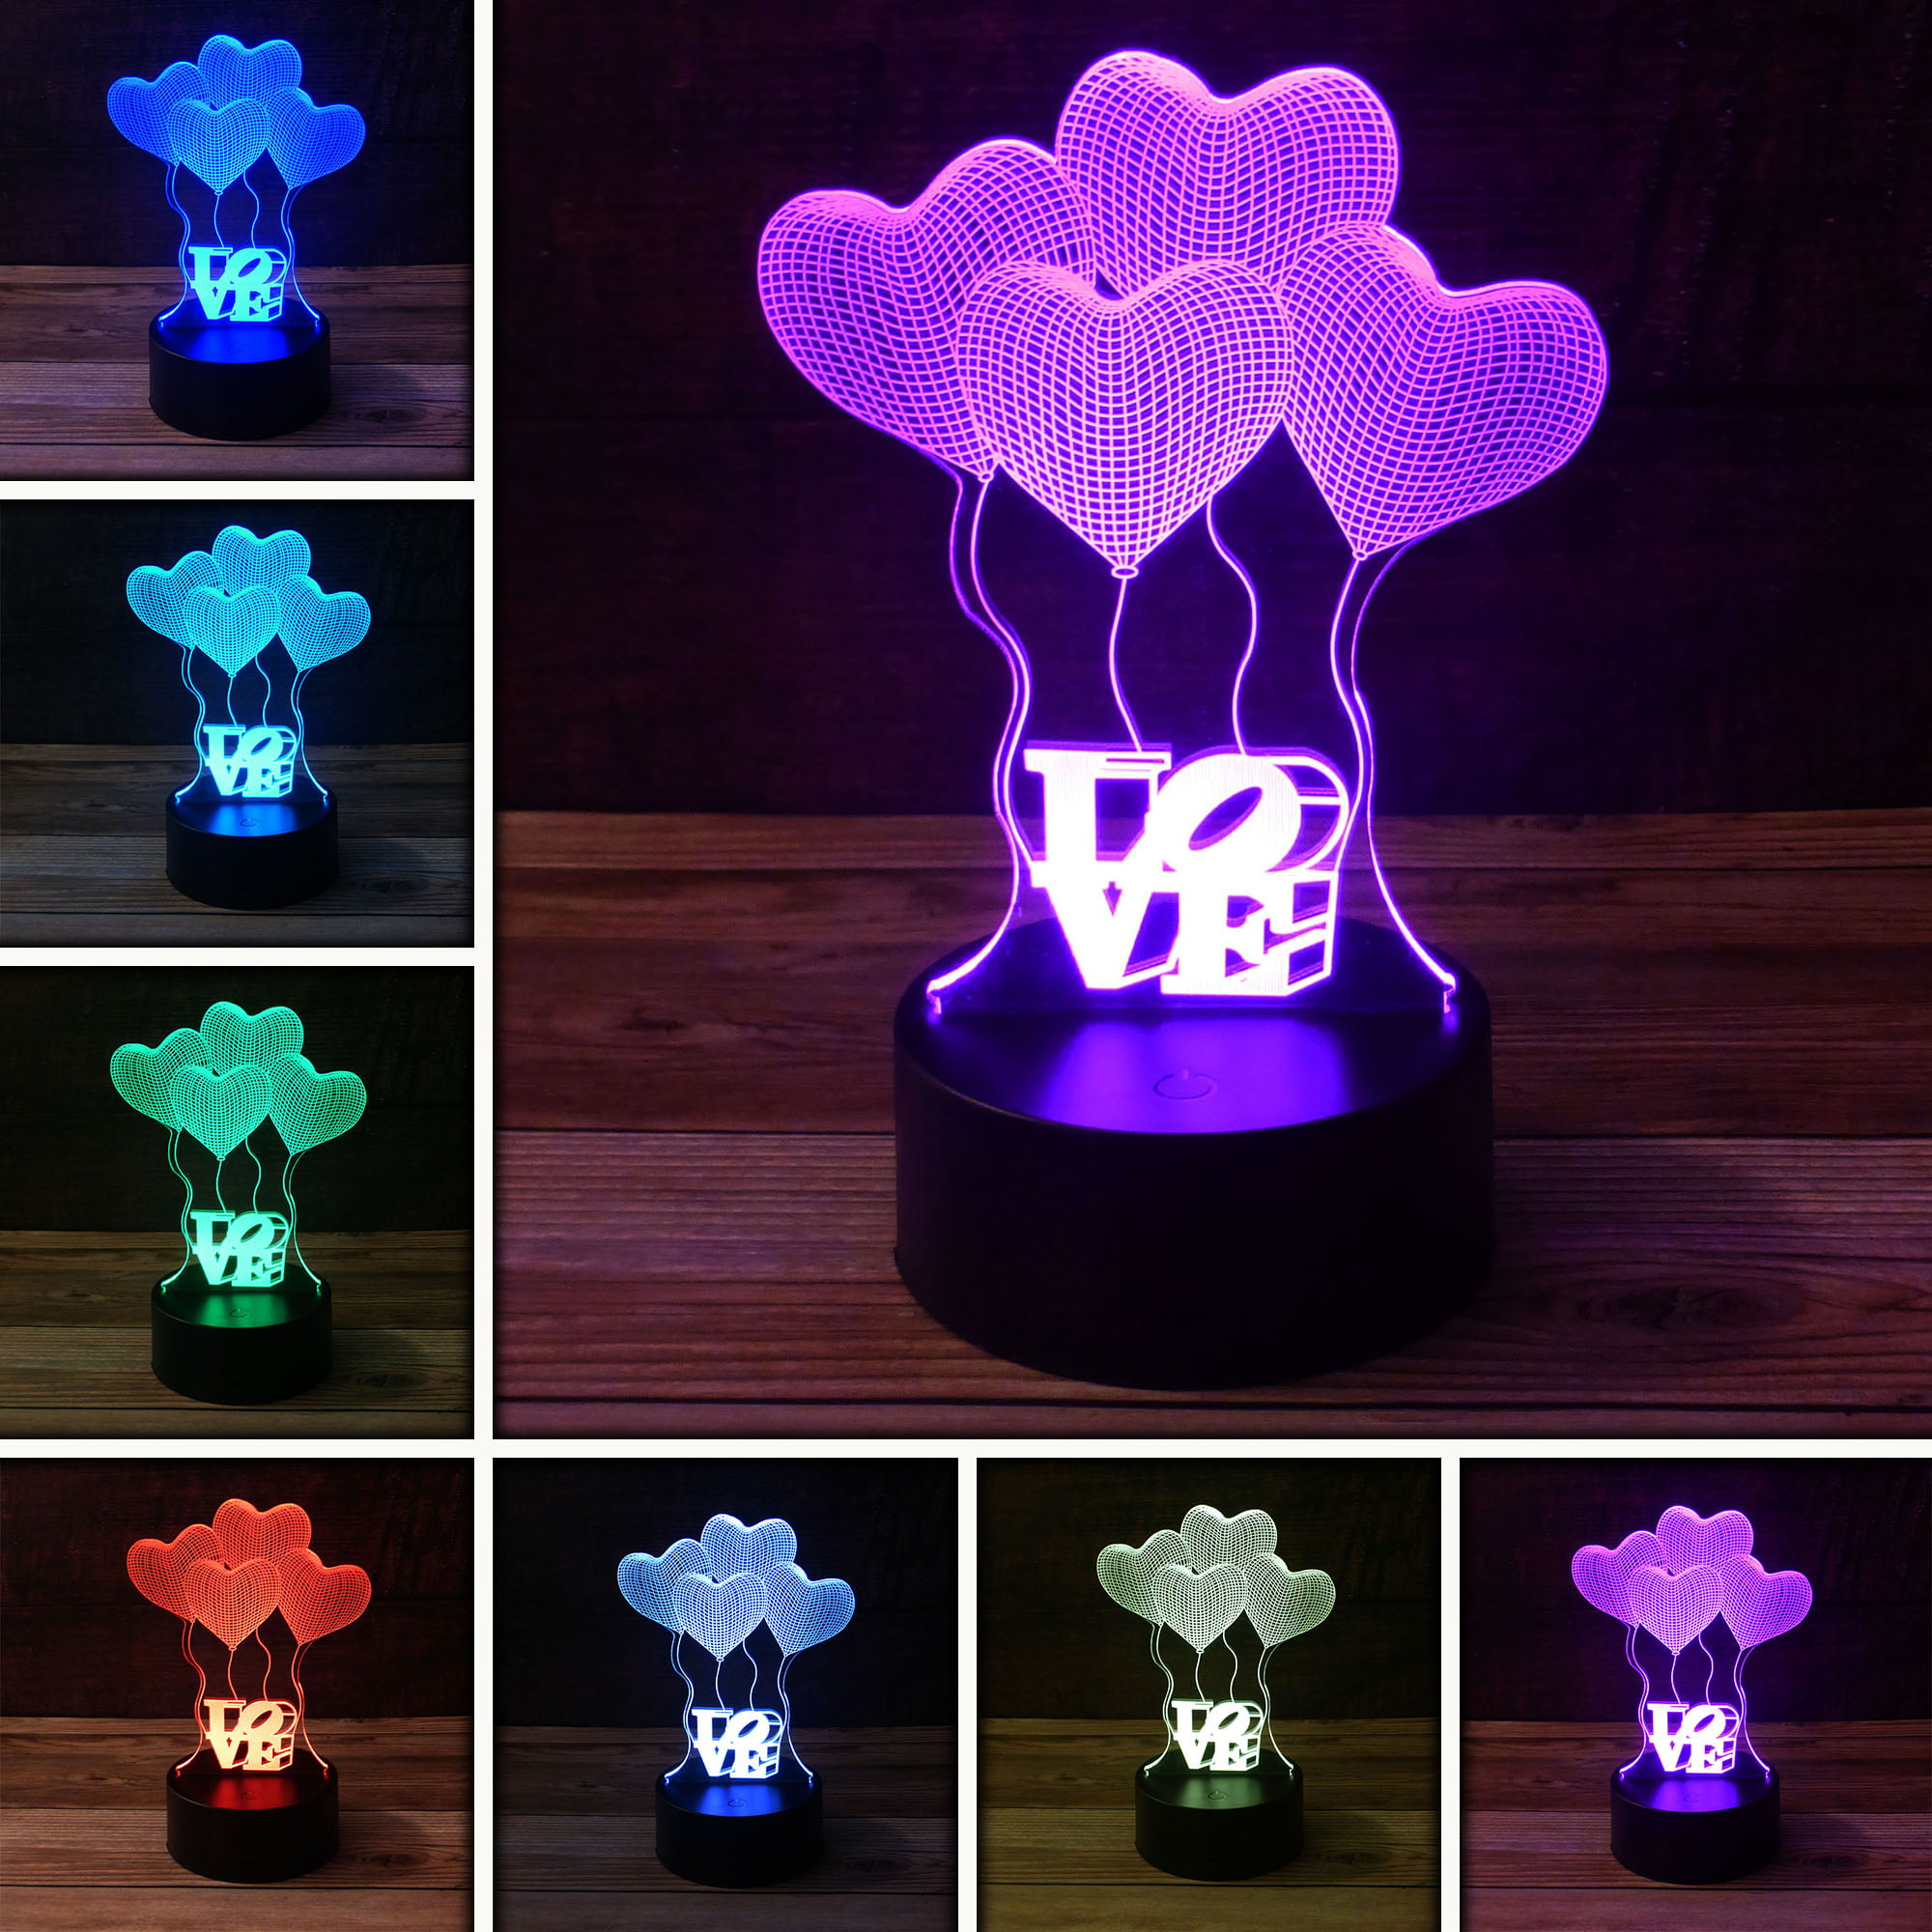 3D Illusion Light,7Models Touch Control Optical Illusion LED Night Light with Charging Cable for Home Décor,Kids,Fans Robot